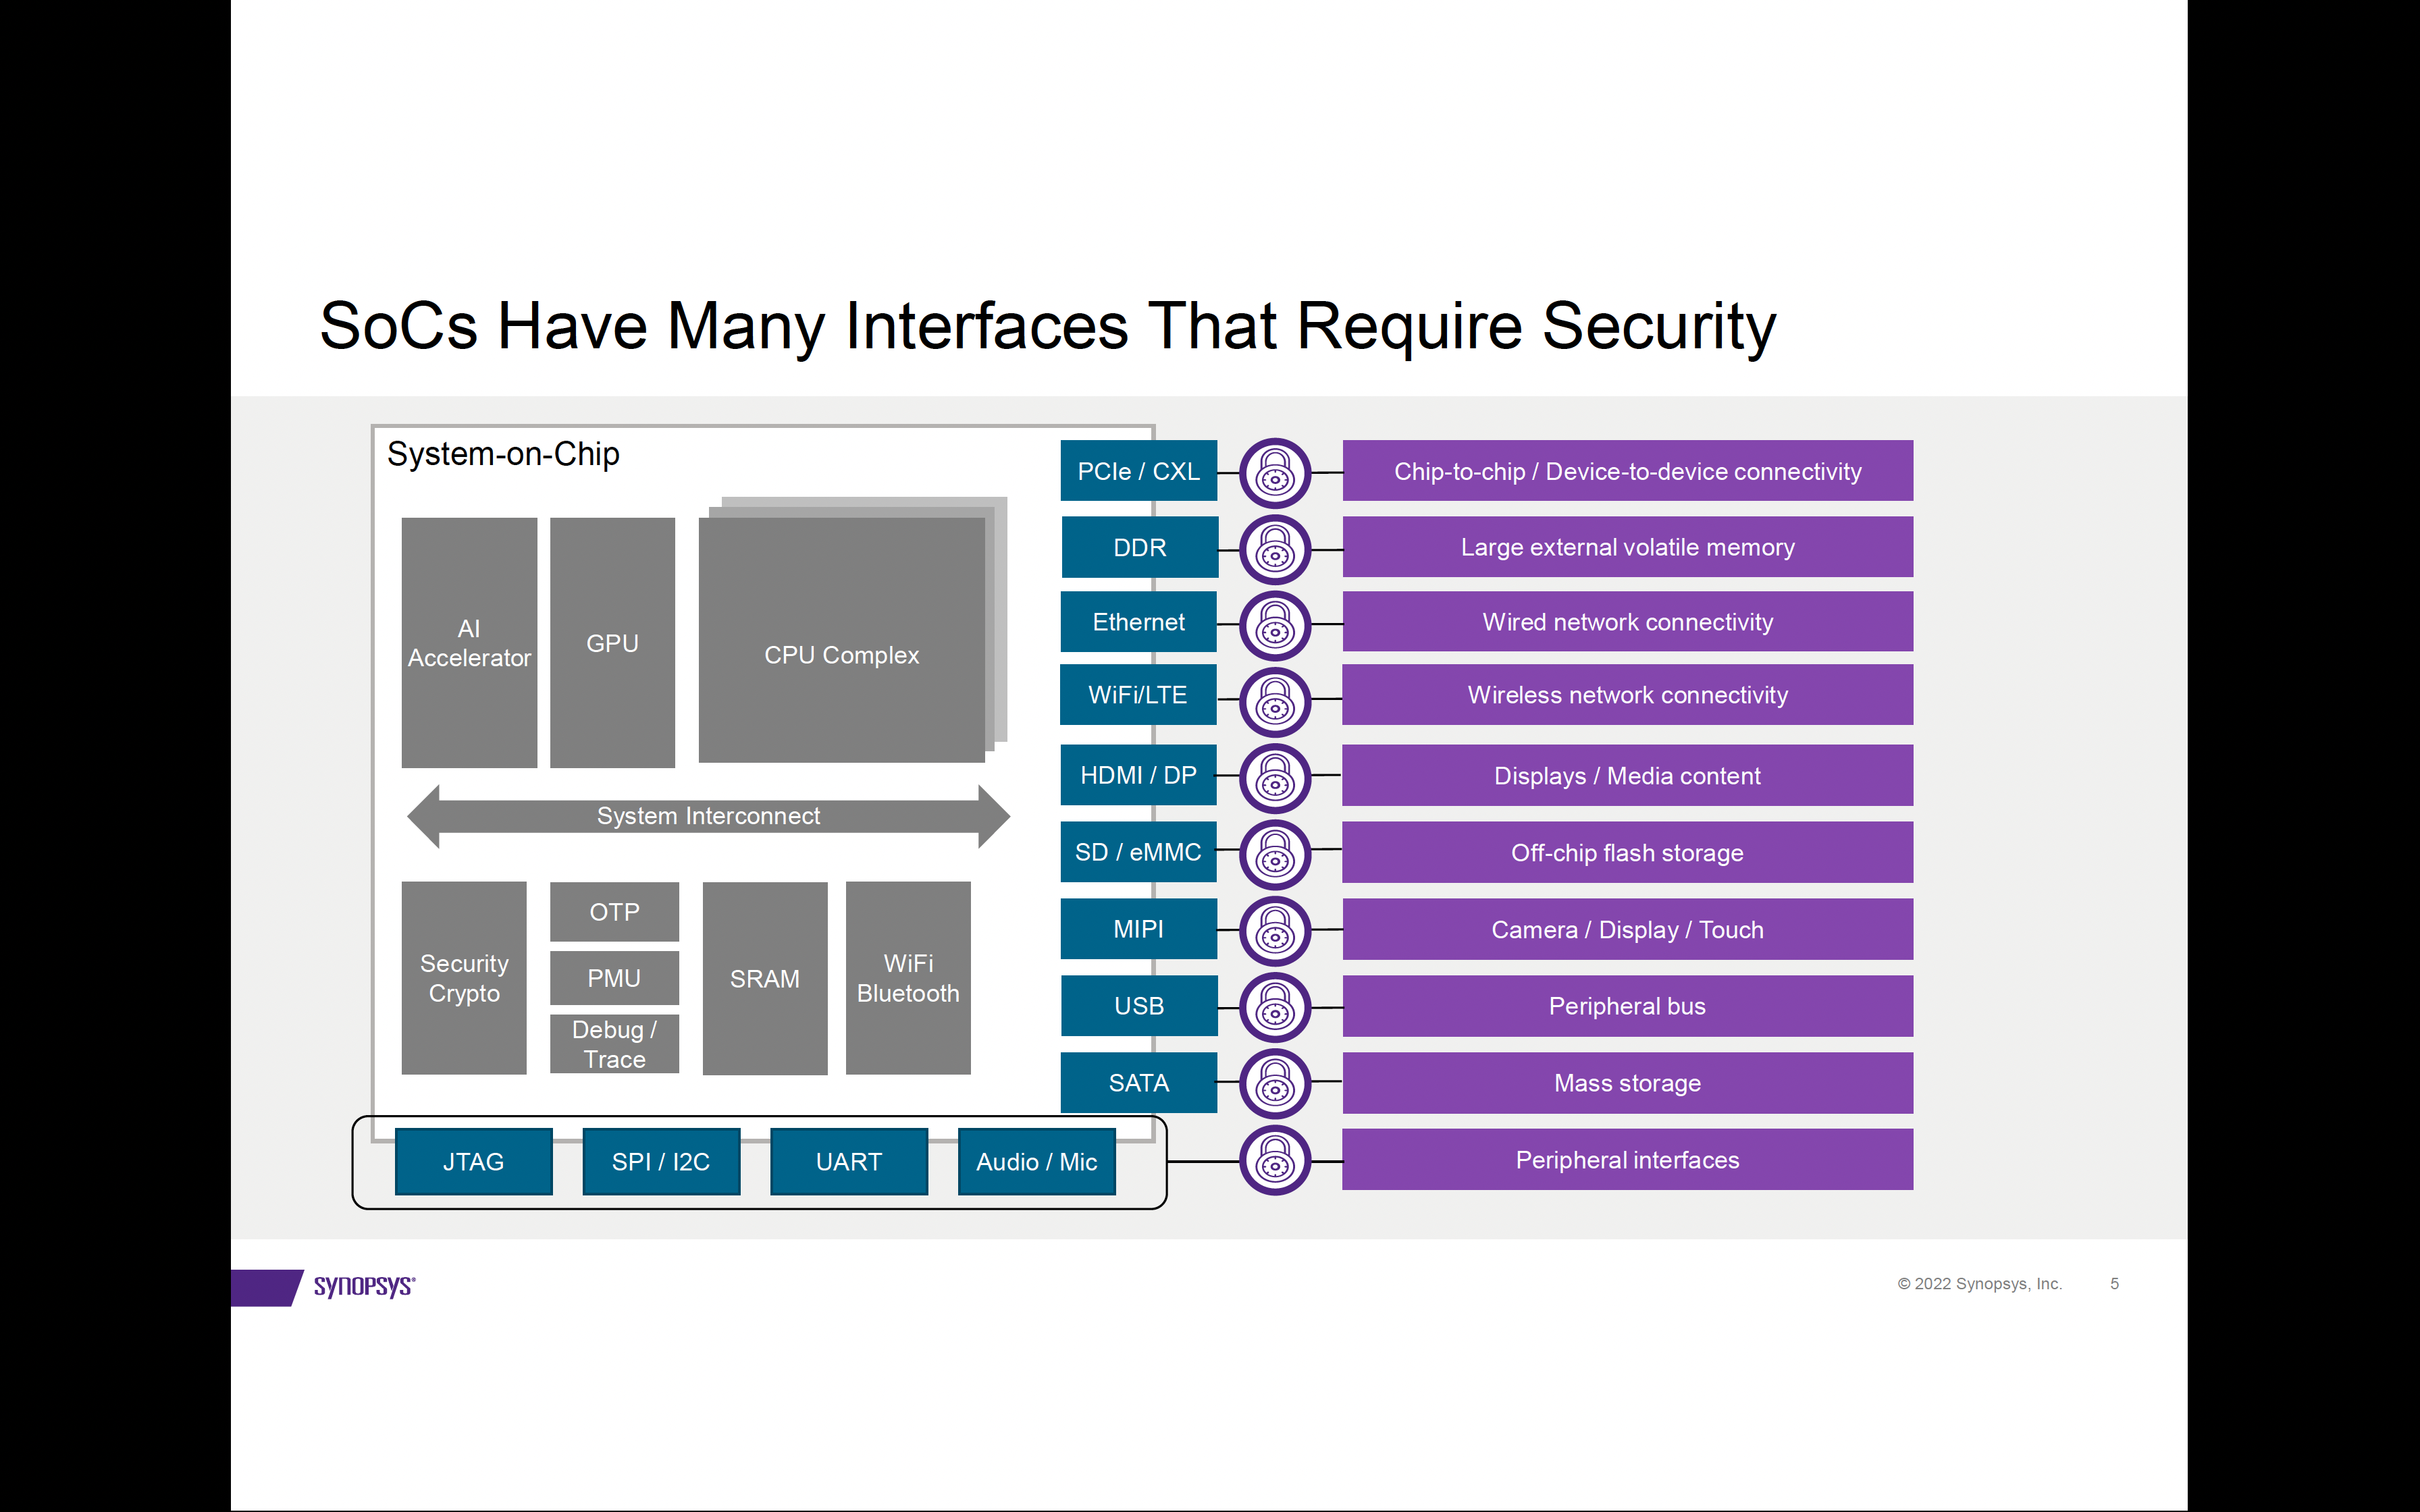 SoCs Have Many Interfaces That Require Security